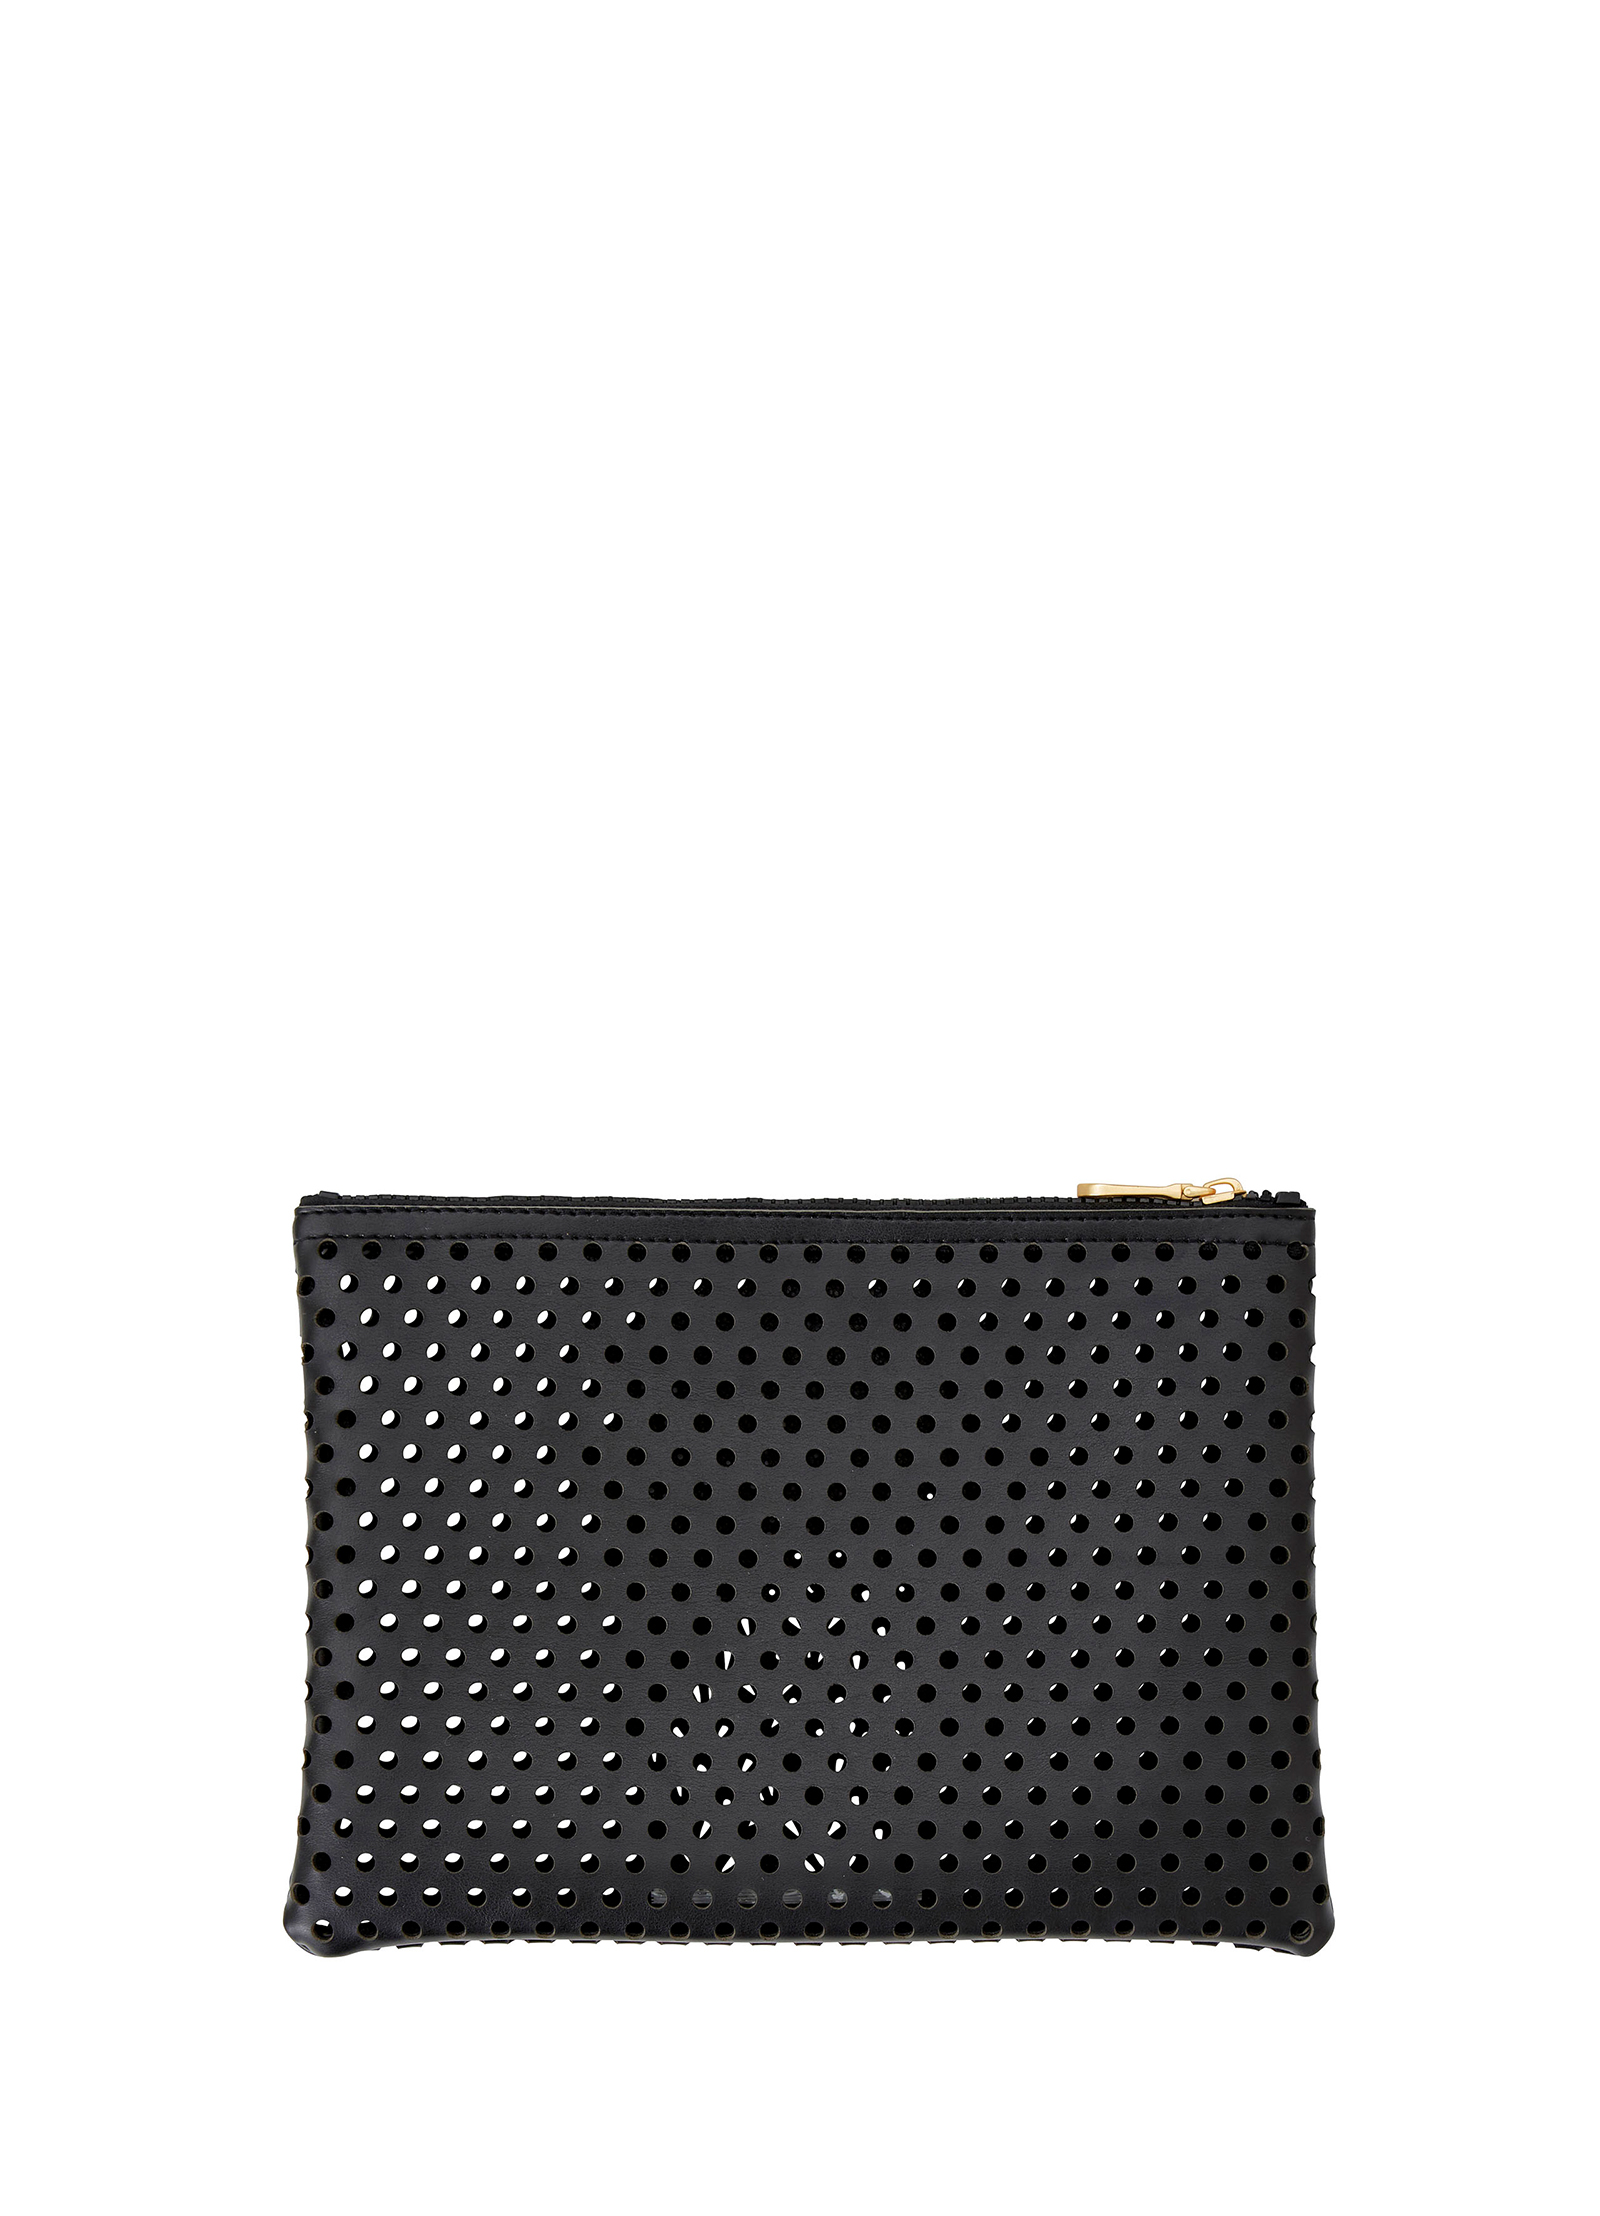 Seafolly Carried Away Pineapple Clutch - Black | Dolphin Swimware